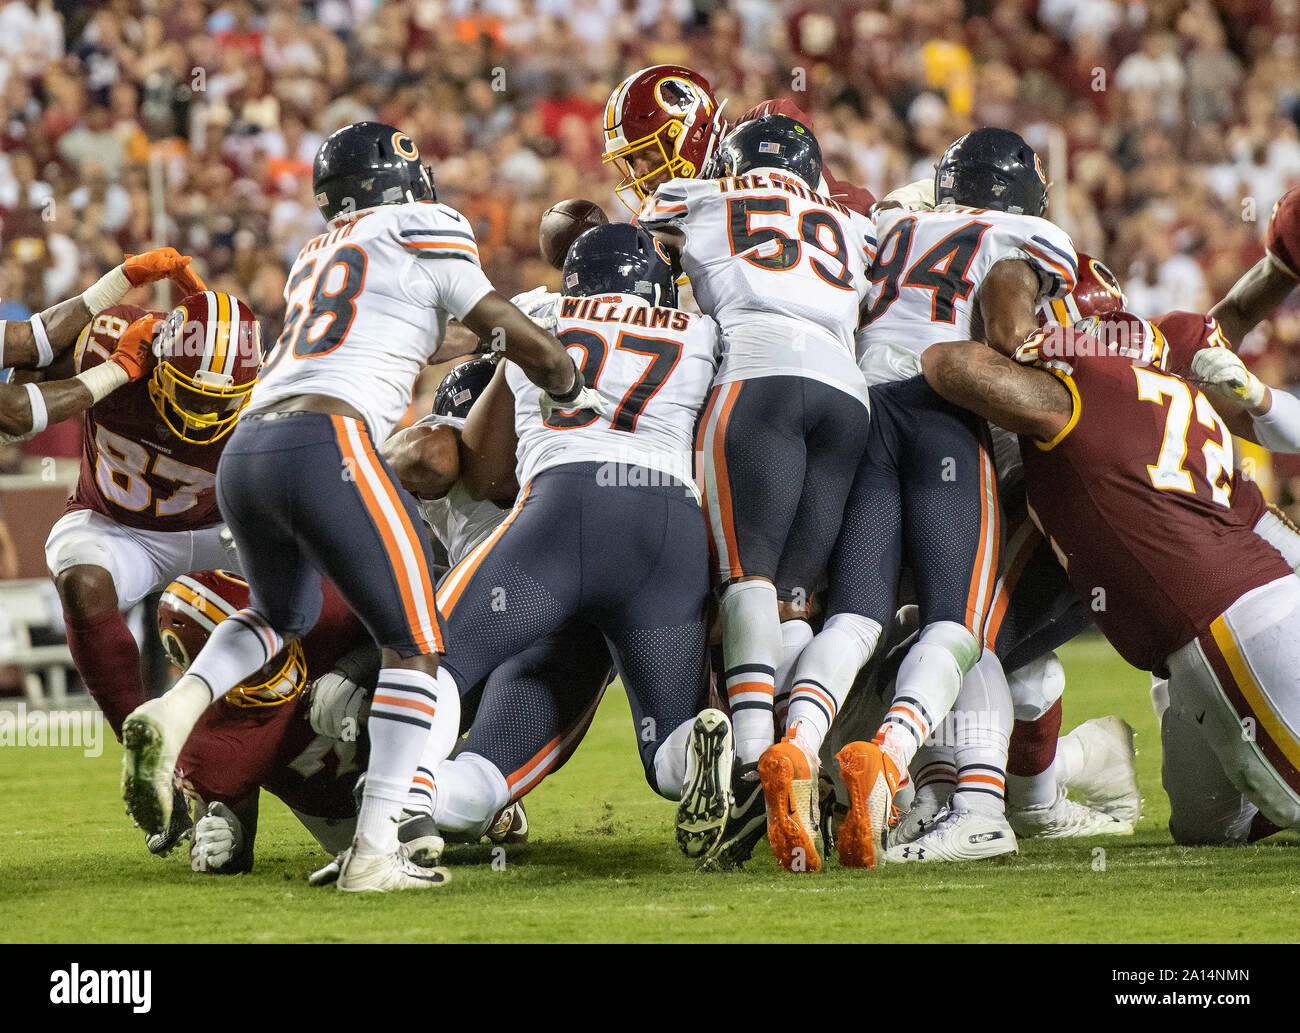 Washington Redskins quarterback Case Keenum (8) tries to jump for a first down on fourth and one in the fourth quarter against the Washington Redskins at FedEx Field in Landover, Maryland on Monday, September 23, 2019. Defending on the play are Chicago Bears inside linebacker Roquan Smith (58), defensive tackle Nick Williams (97), inside linebacker Danny Trevathan (59), and outside linebacker Leonard Floyd (94). Washington Redskins blocking on the play include tight end Jeremy Sprinkle (87) and offensive tackle Donald Penn (72)Credit: Ron Sachs/CNP | usage worldwide Stock Photo